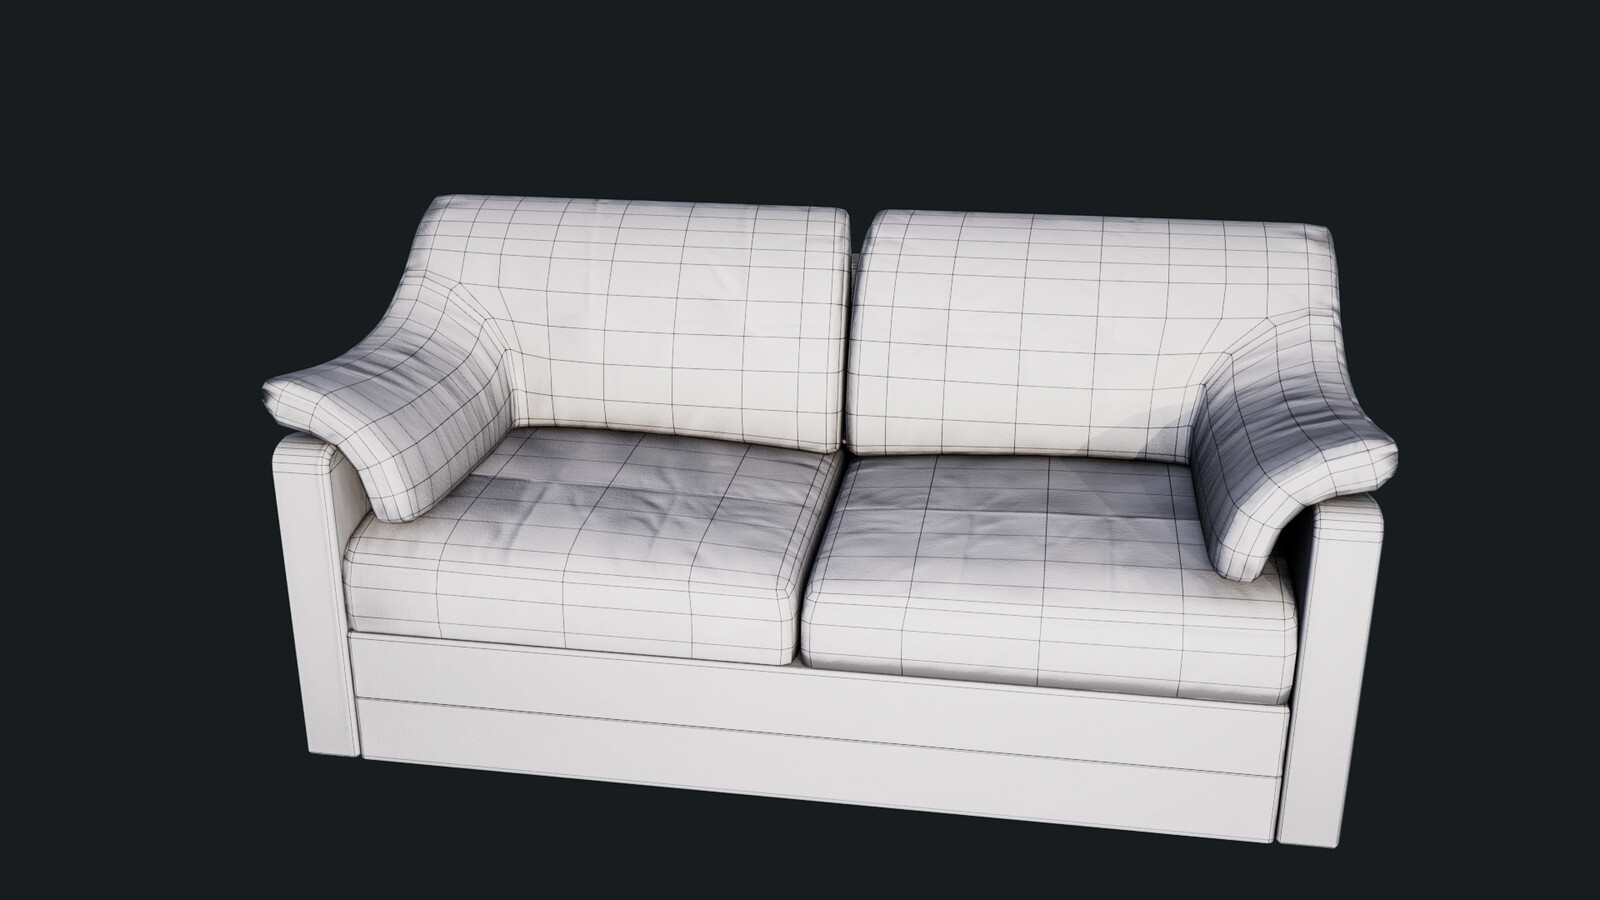 leather sofa topology. Details were sculpted in Zbrush and baked into a normal map